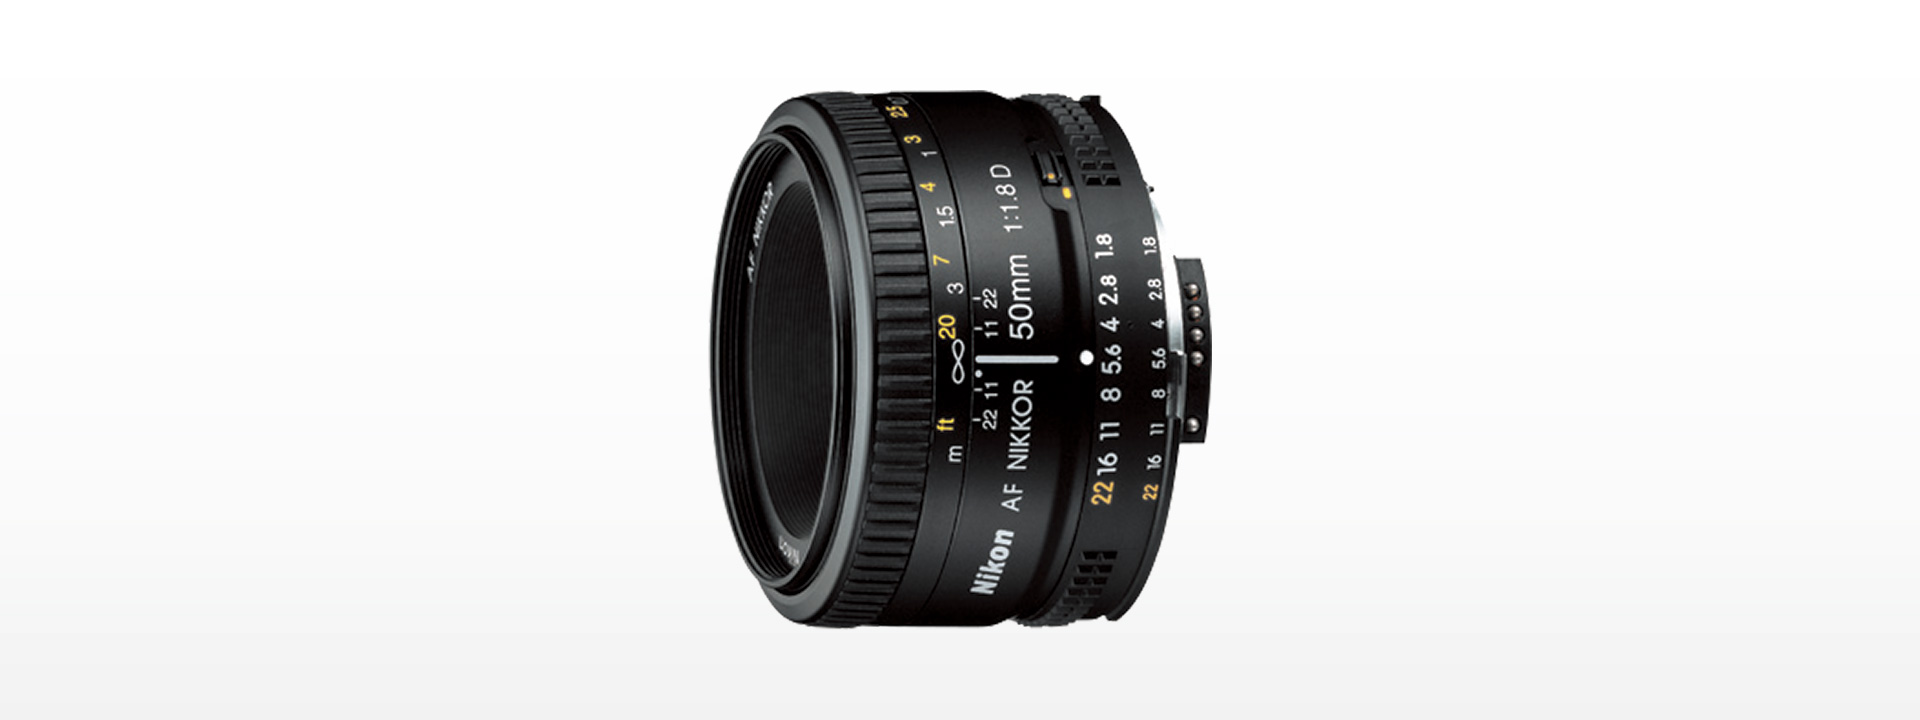 To disable anchor lecture AI AF Nikkor 50mm f/1.8D - 概要 | NIKKORレンズ | ニコンイメージング